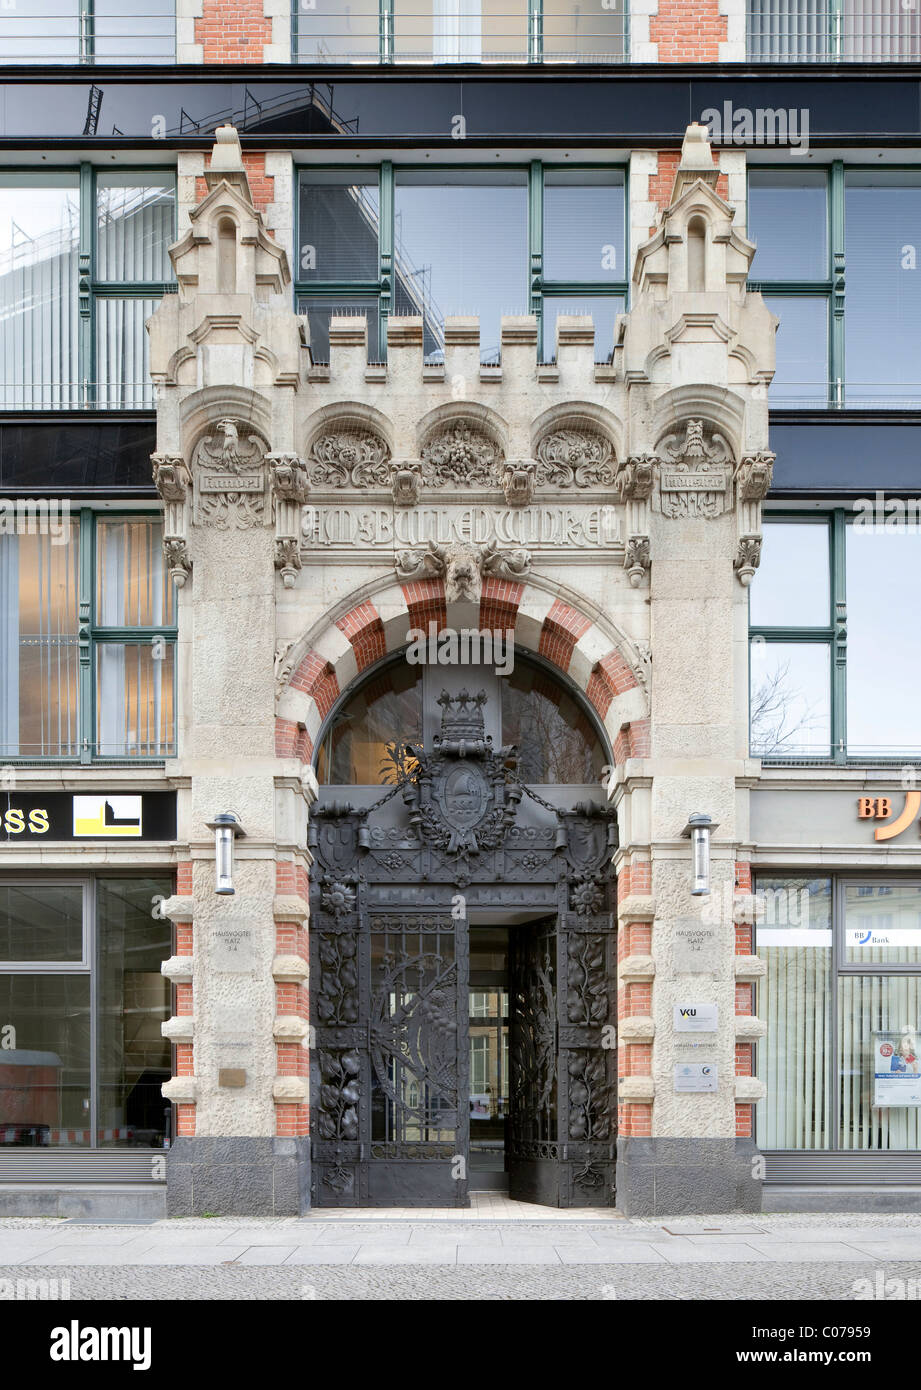 Historical portal at an office building in the Taubenstrasse street, Mitte district, Berlin, Germany, Europe Stock Photo